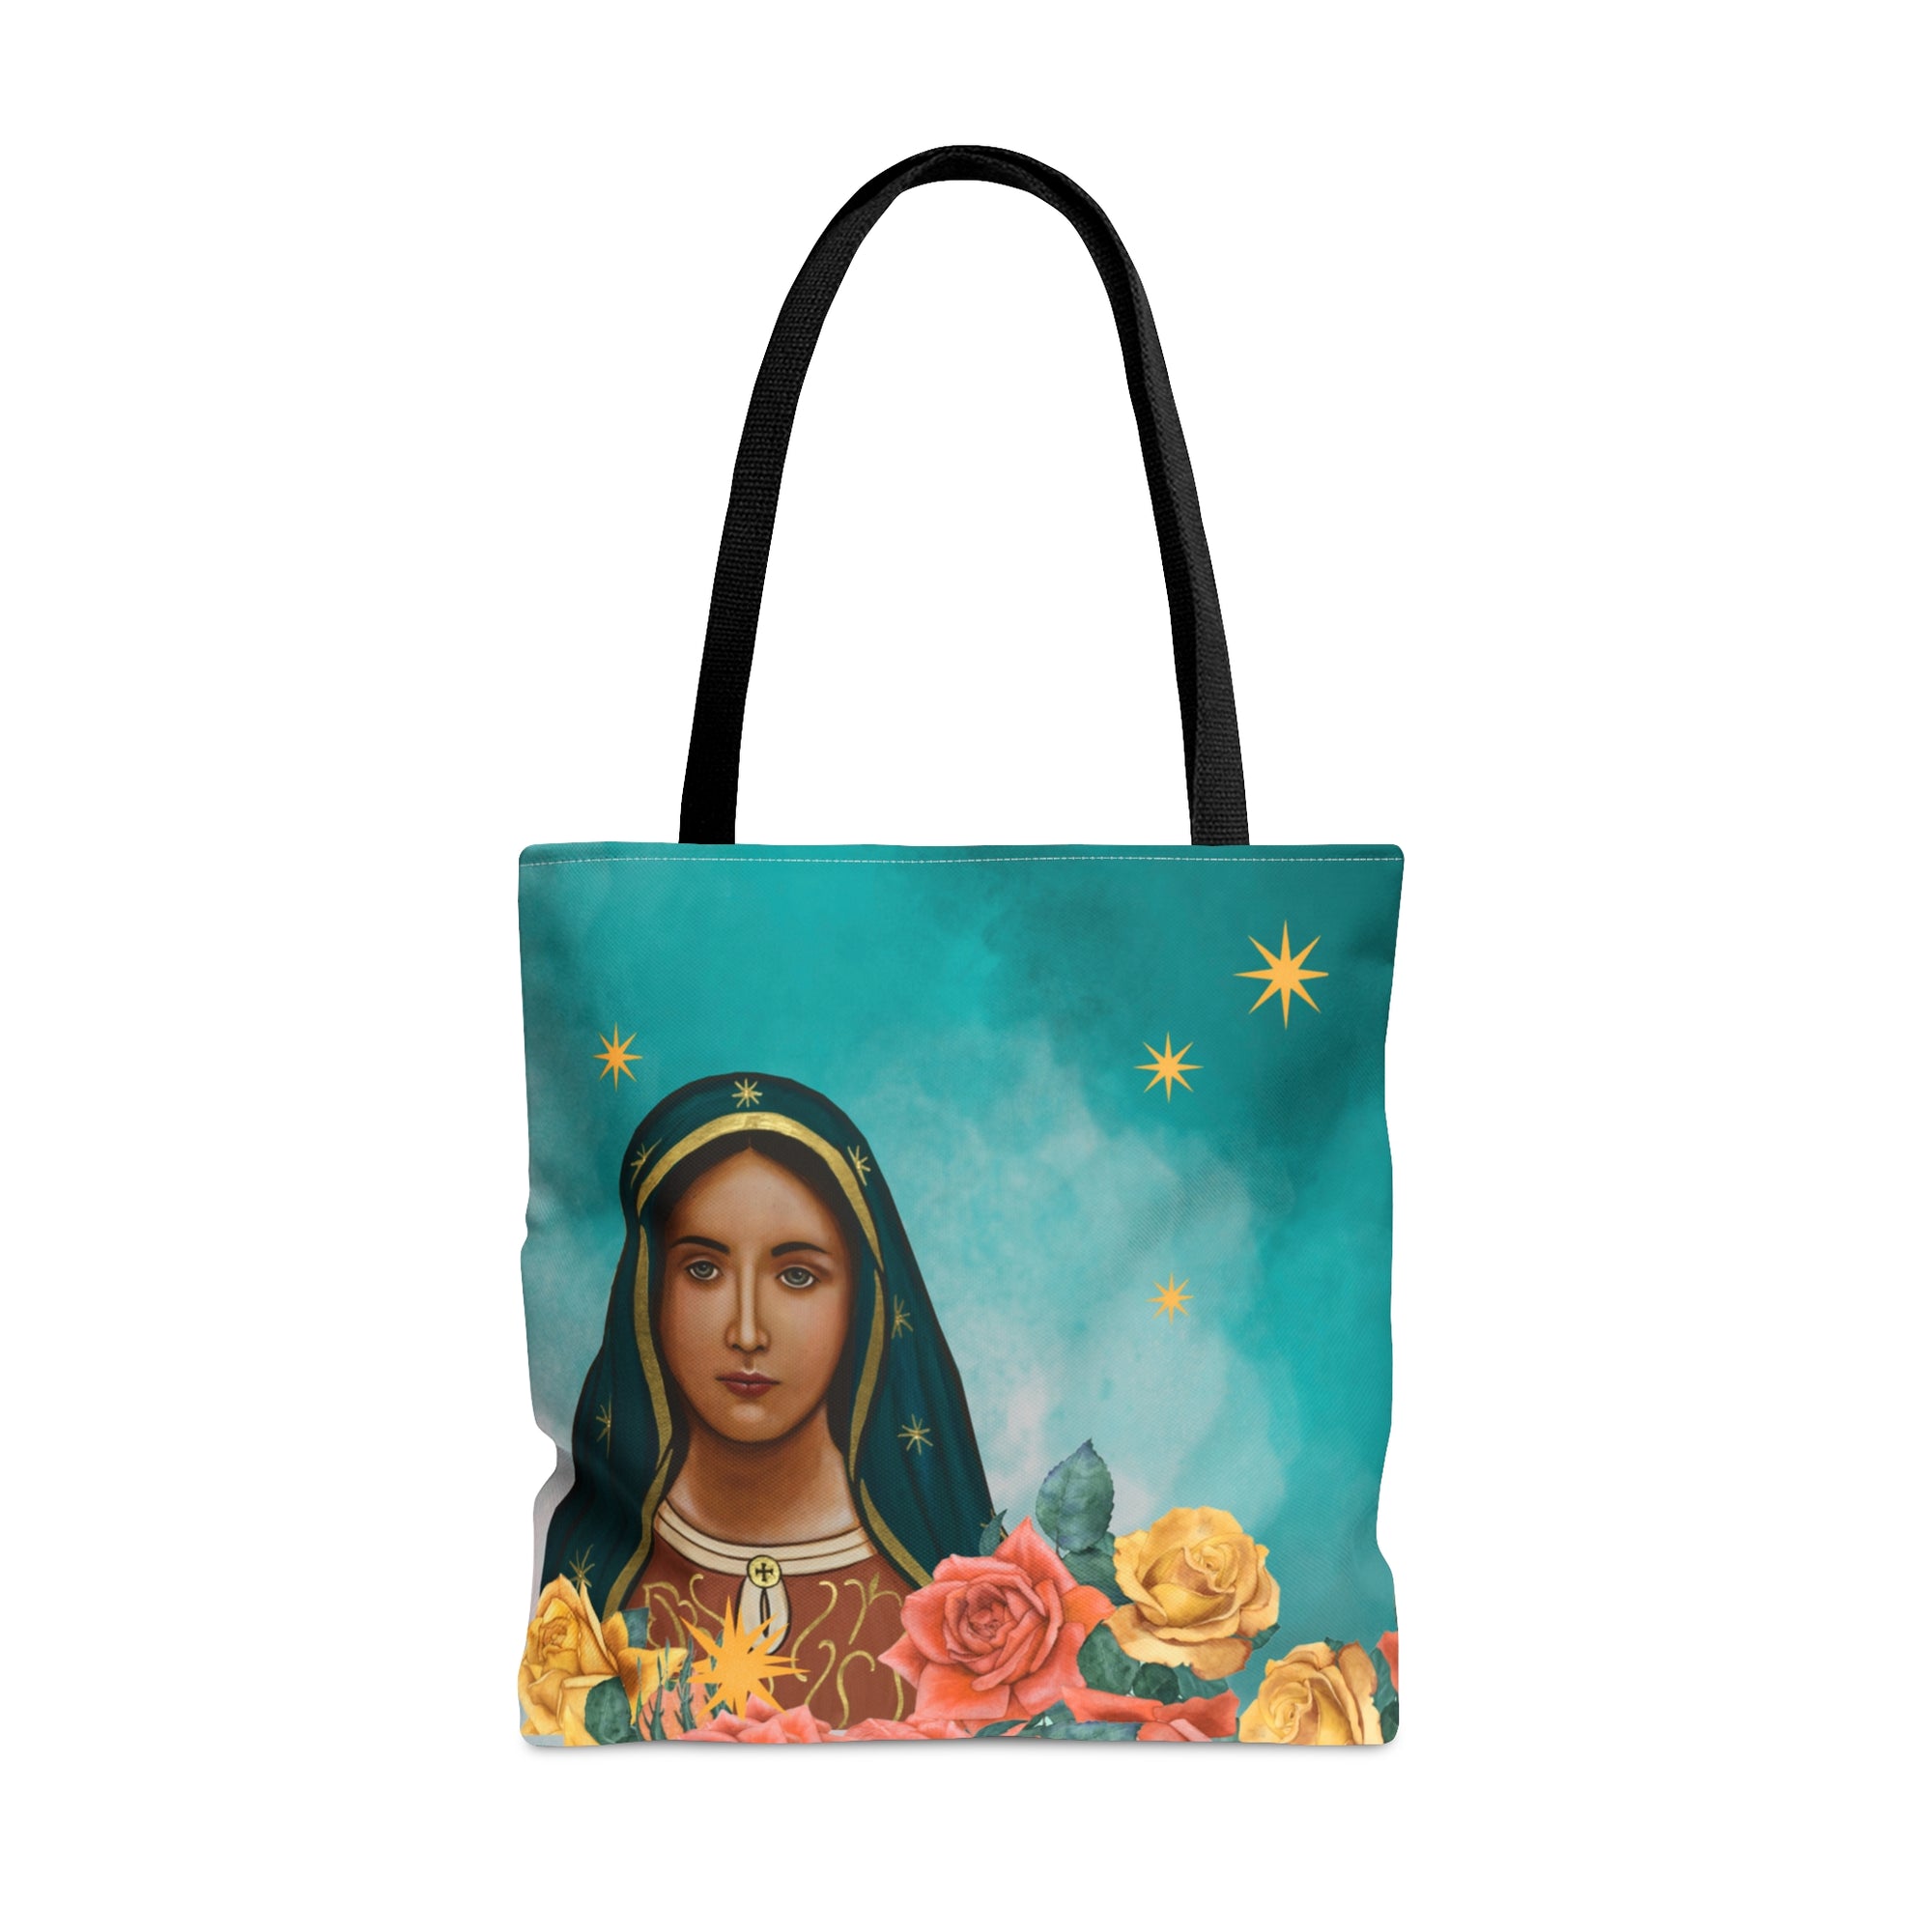 Our Lady of Guadalupe Tote Bag 16"x16"